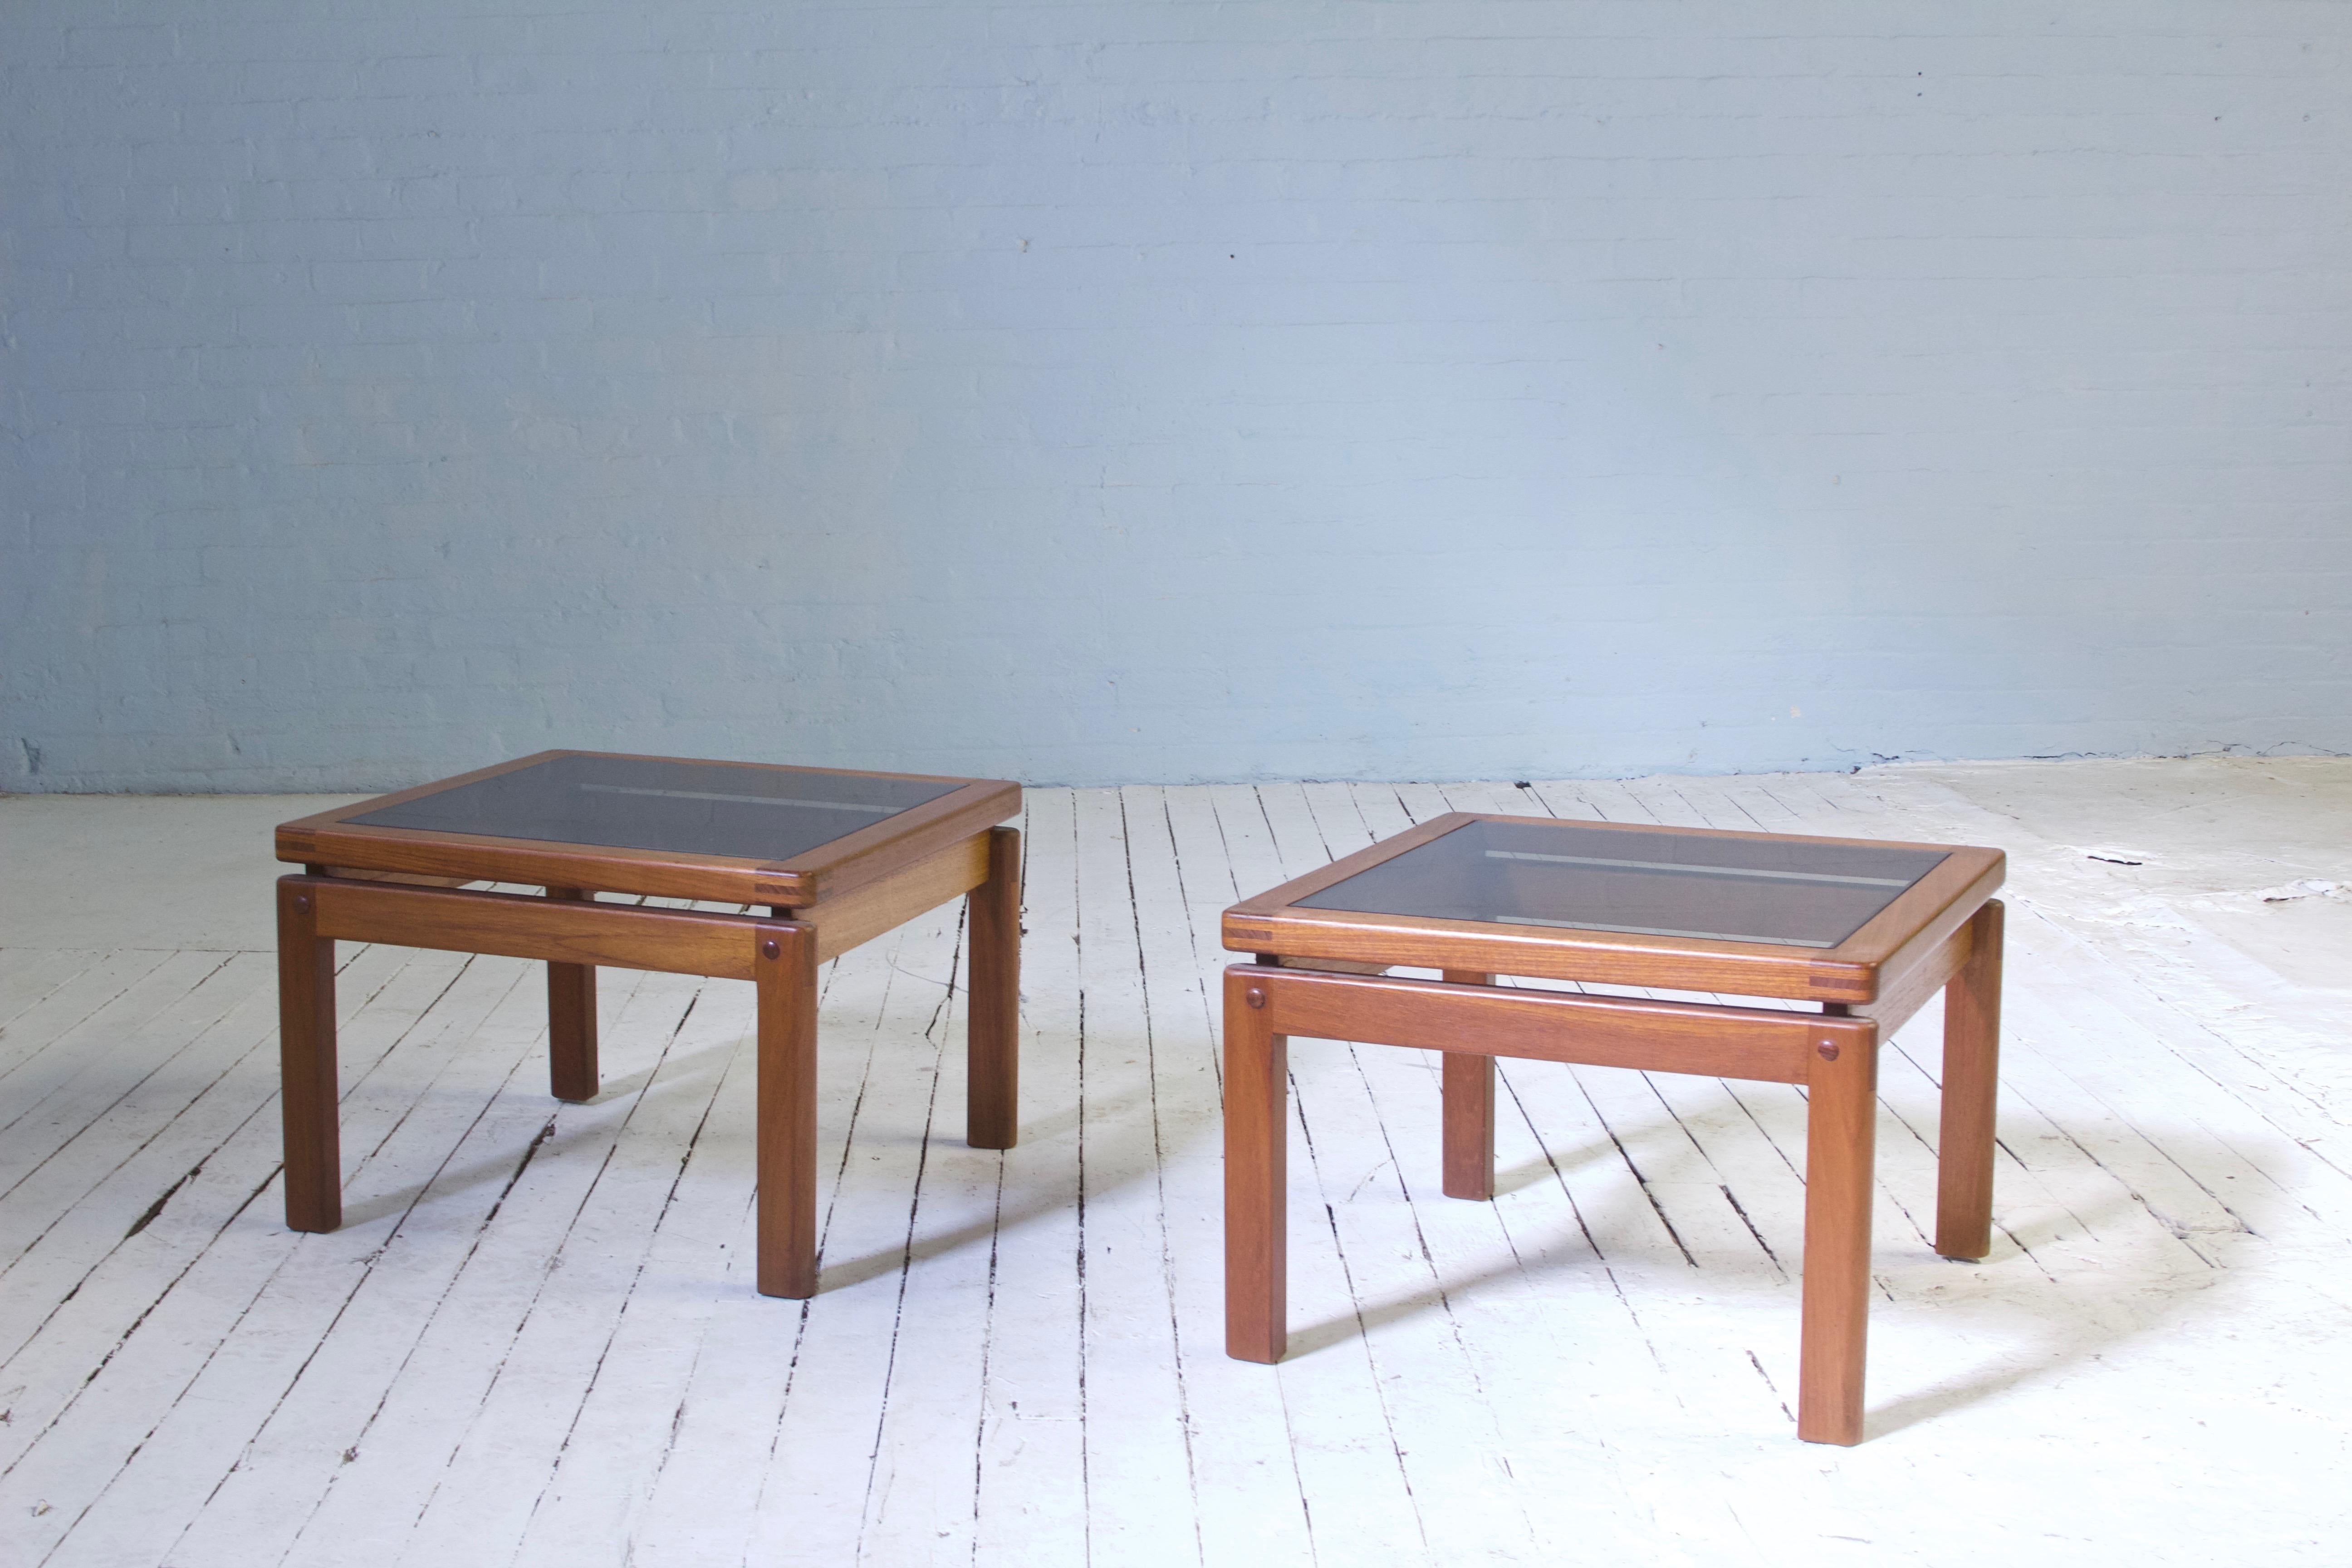 Lovely pair of side tables with exposed finger joinery featuring solid teak frames and tinted glass tops. This design highlights an exciting interplay between straight lines and curves--a simple rectilinear frame is elevated by carefully chosen